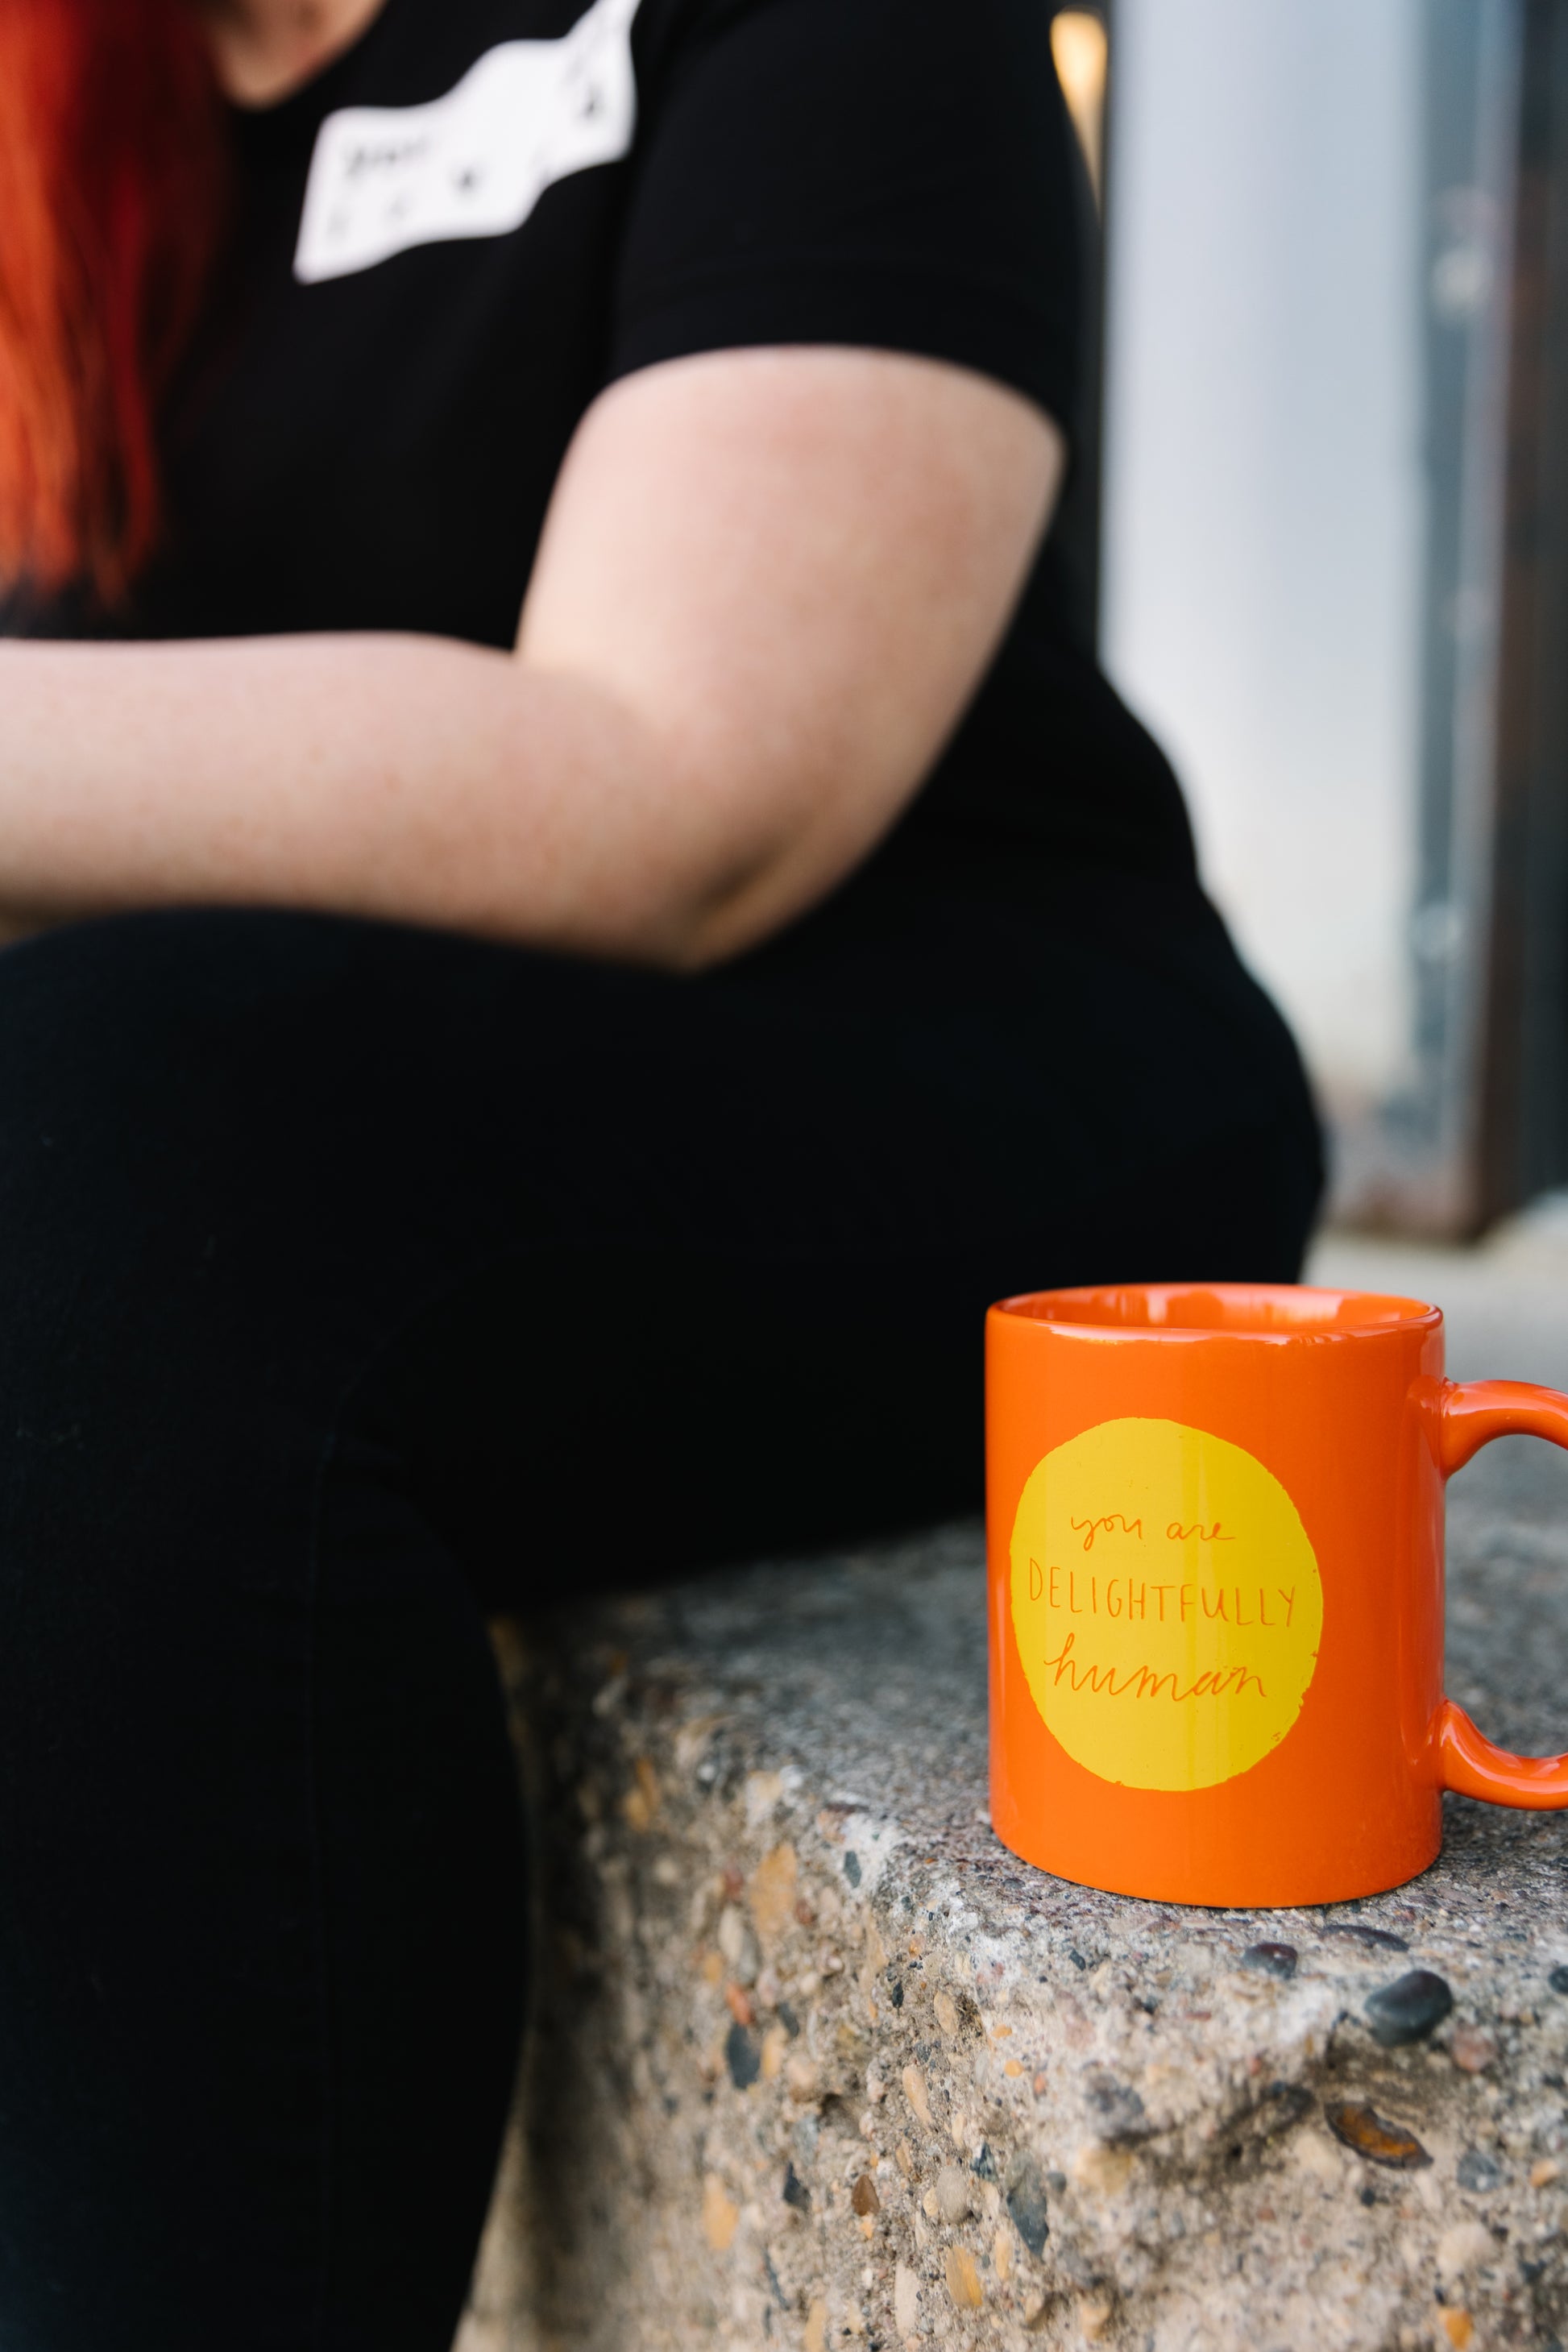 Person sitting on a step beside a bright orange mug with a yellow circle in the center of the mug that says "you are delightfully human"